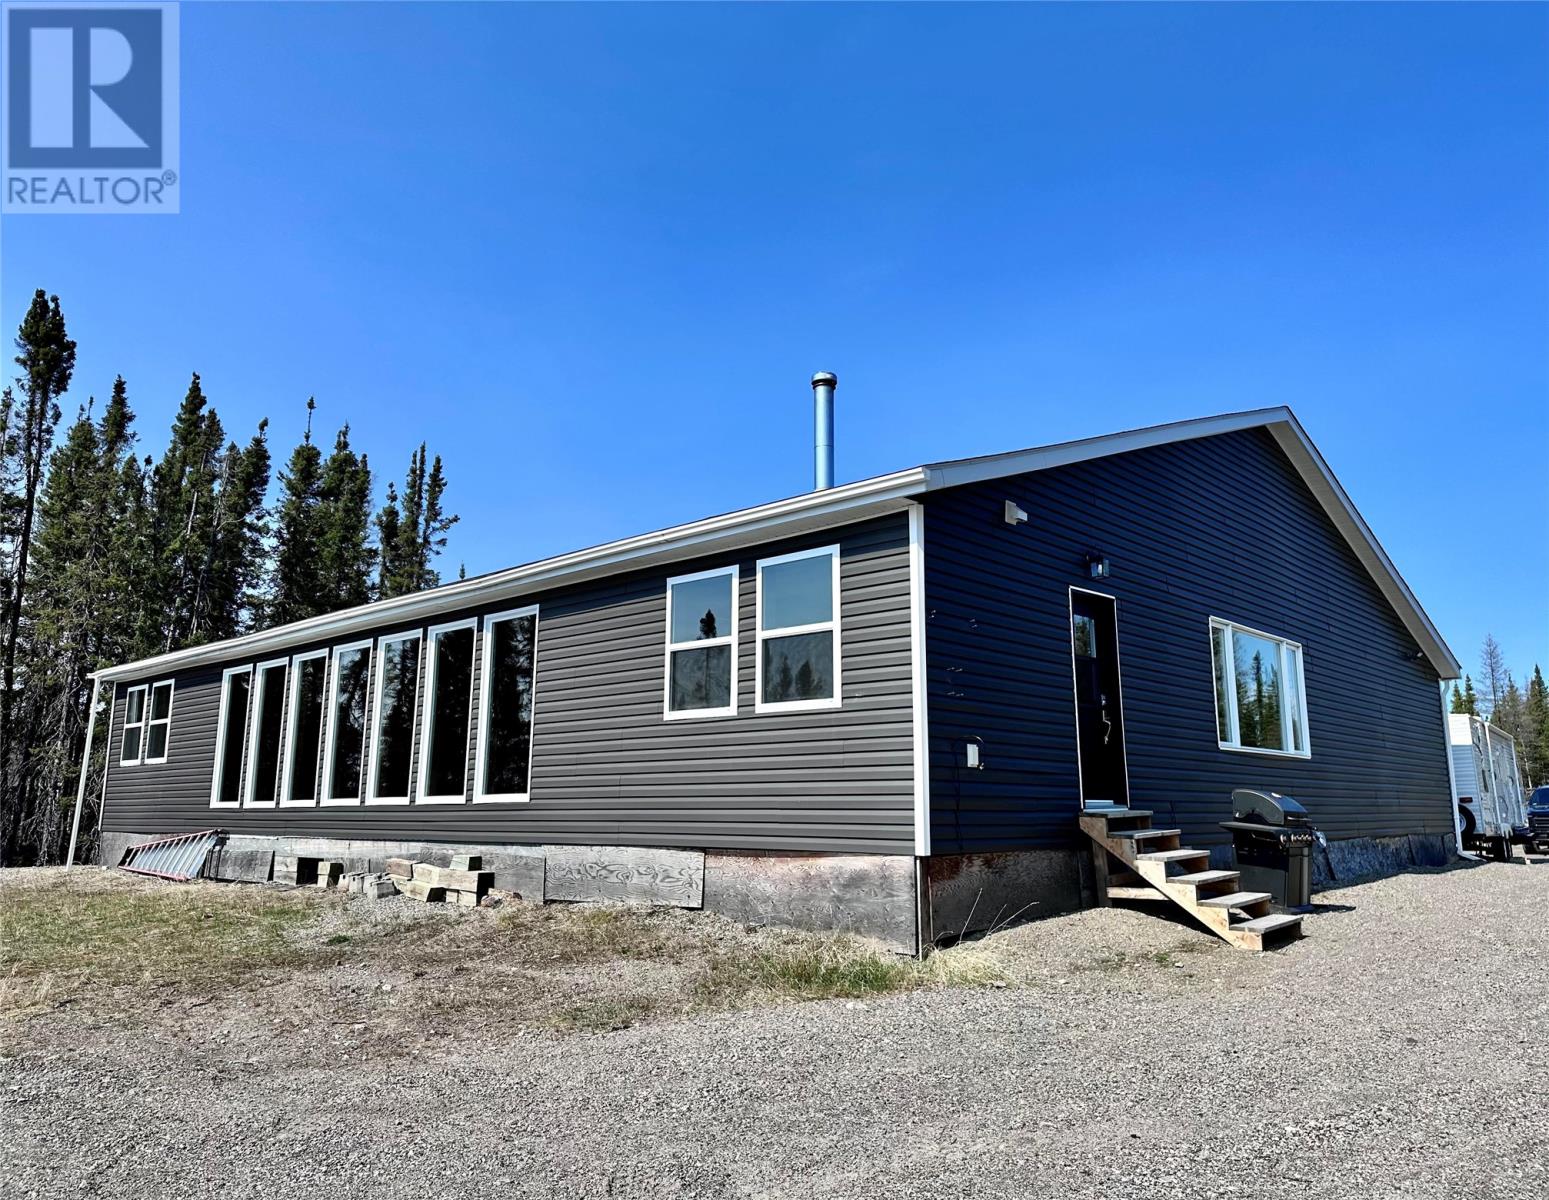 145888 Ashuanipi, Wabush, A0R1B0, 3 Bedrooms Bedrooms, ,2 BathroomsBathrooms,Single Family,For sale,Ashuanipi,1258839